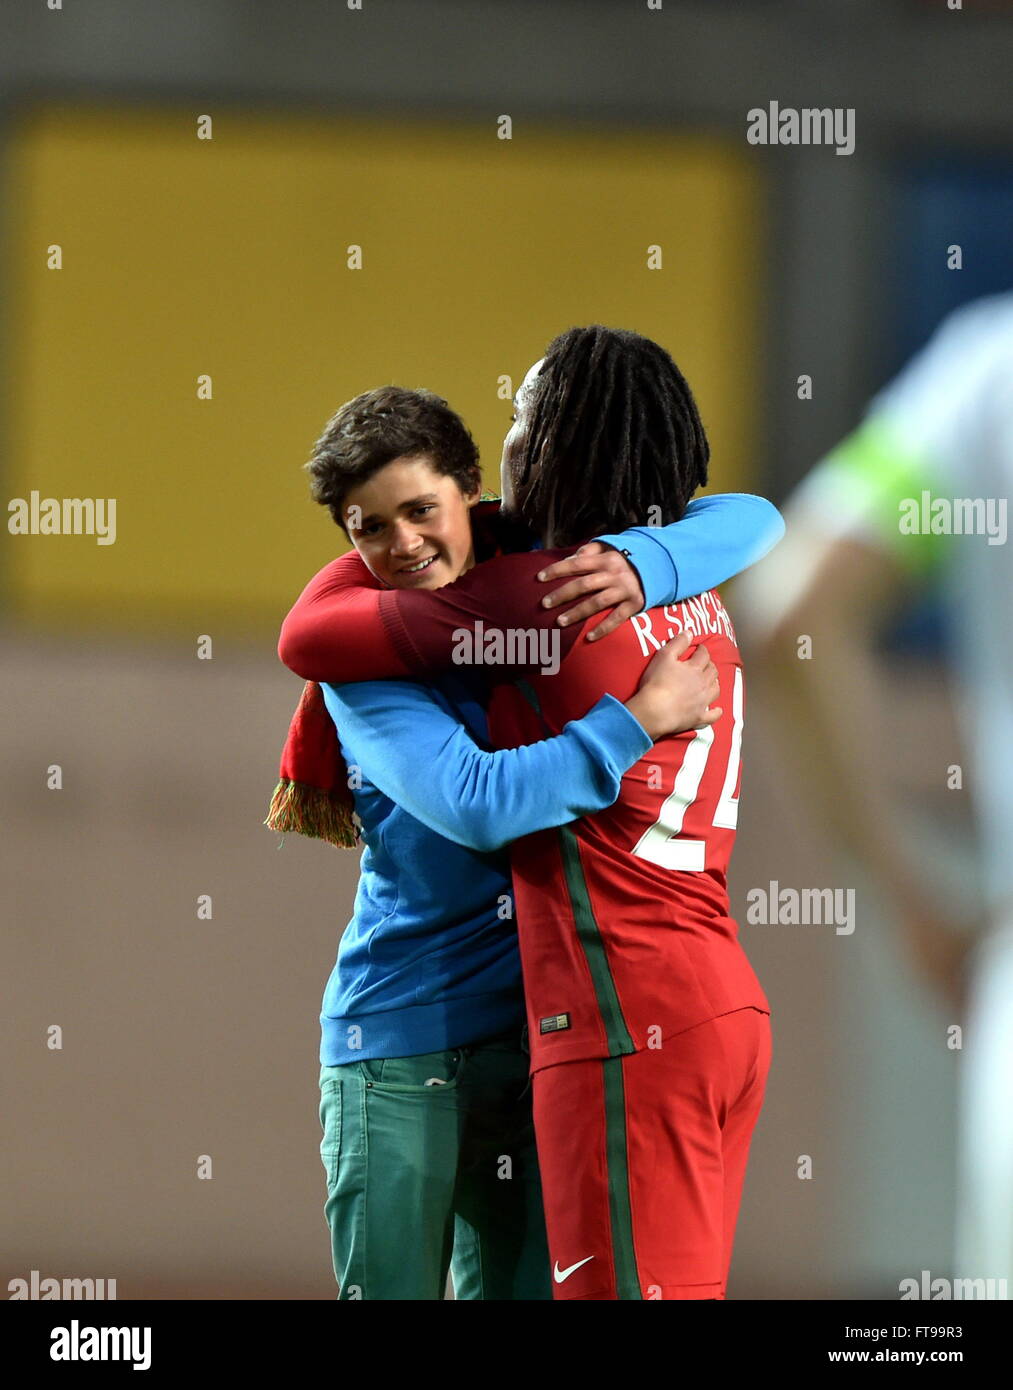 Leiria, Portugal. 25th Mar, 2016. A Portuguese fan rushes into the pitch to hug Portugal's Renato Sanches during a friendly soccer match between Portugal and Bulgaria in preparation for Euro 2016 at Leiria Municipal Stadium, Portugal, on March 25, 2016. Bulgaria won 1-0. Credit:  Zhang Liyun/Xinhua/Alamy Live News Stock Photo